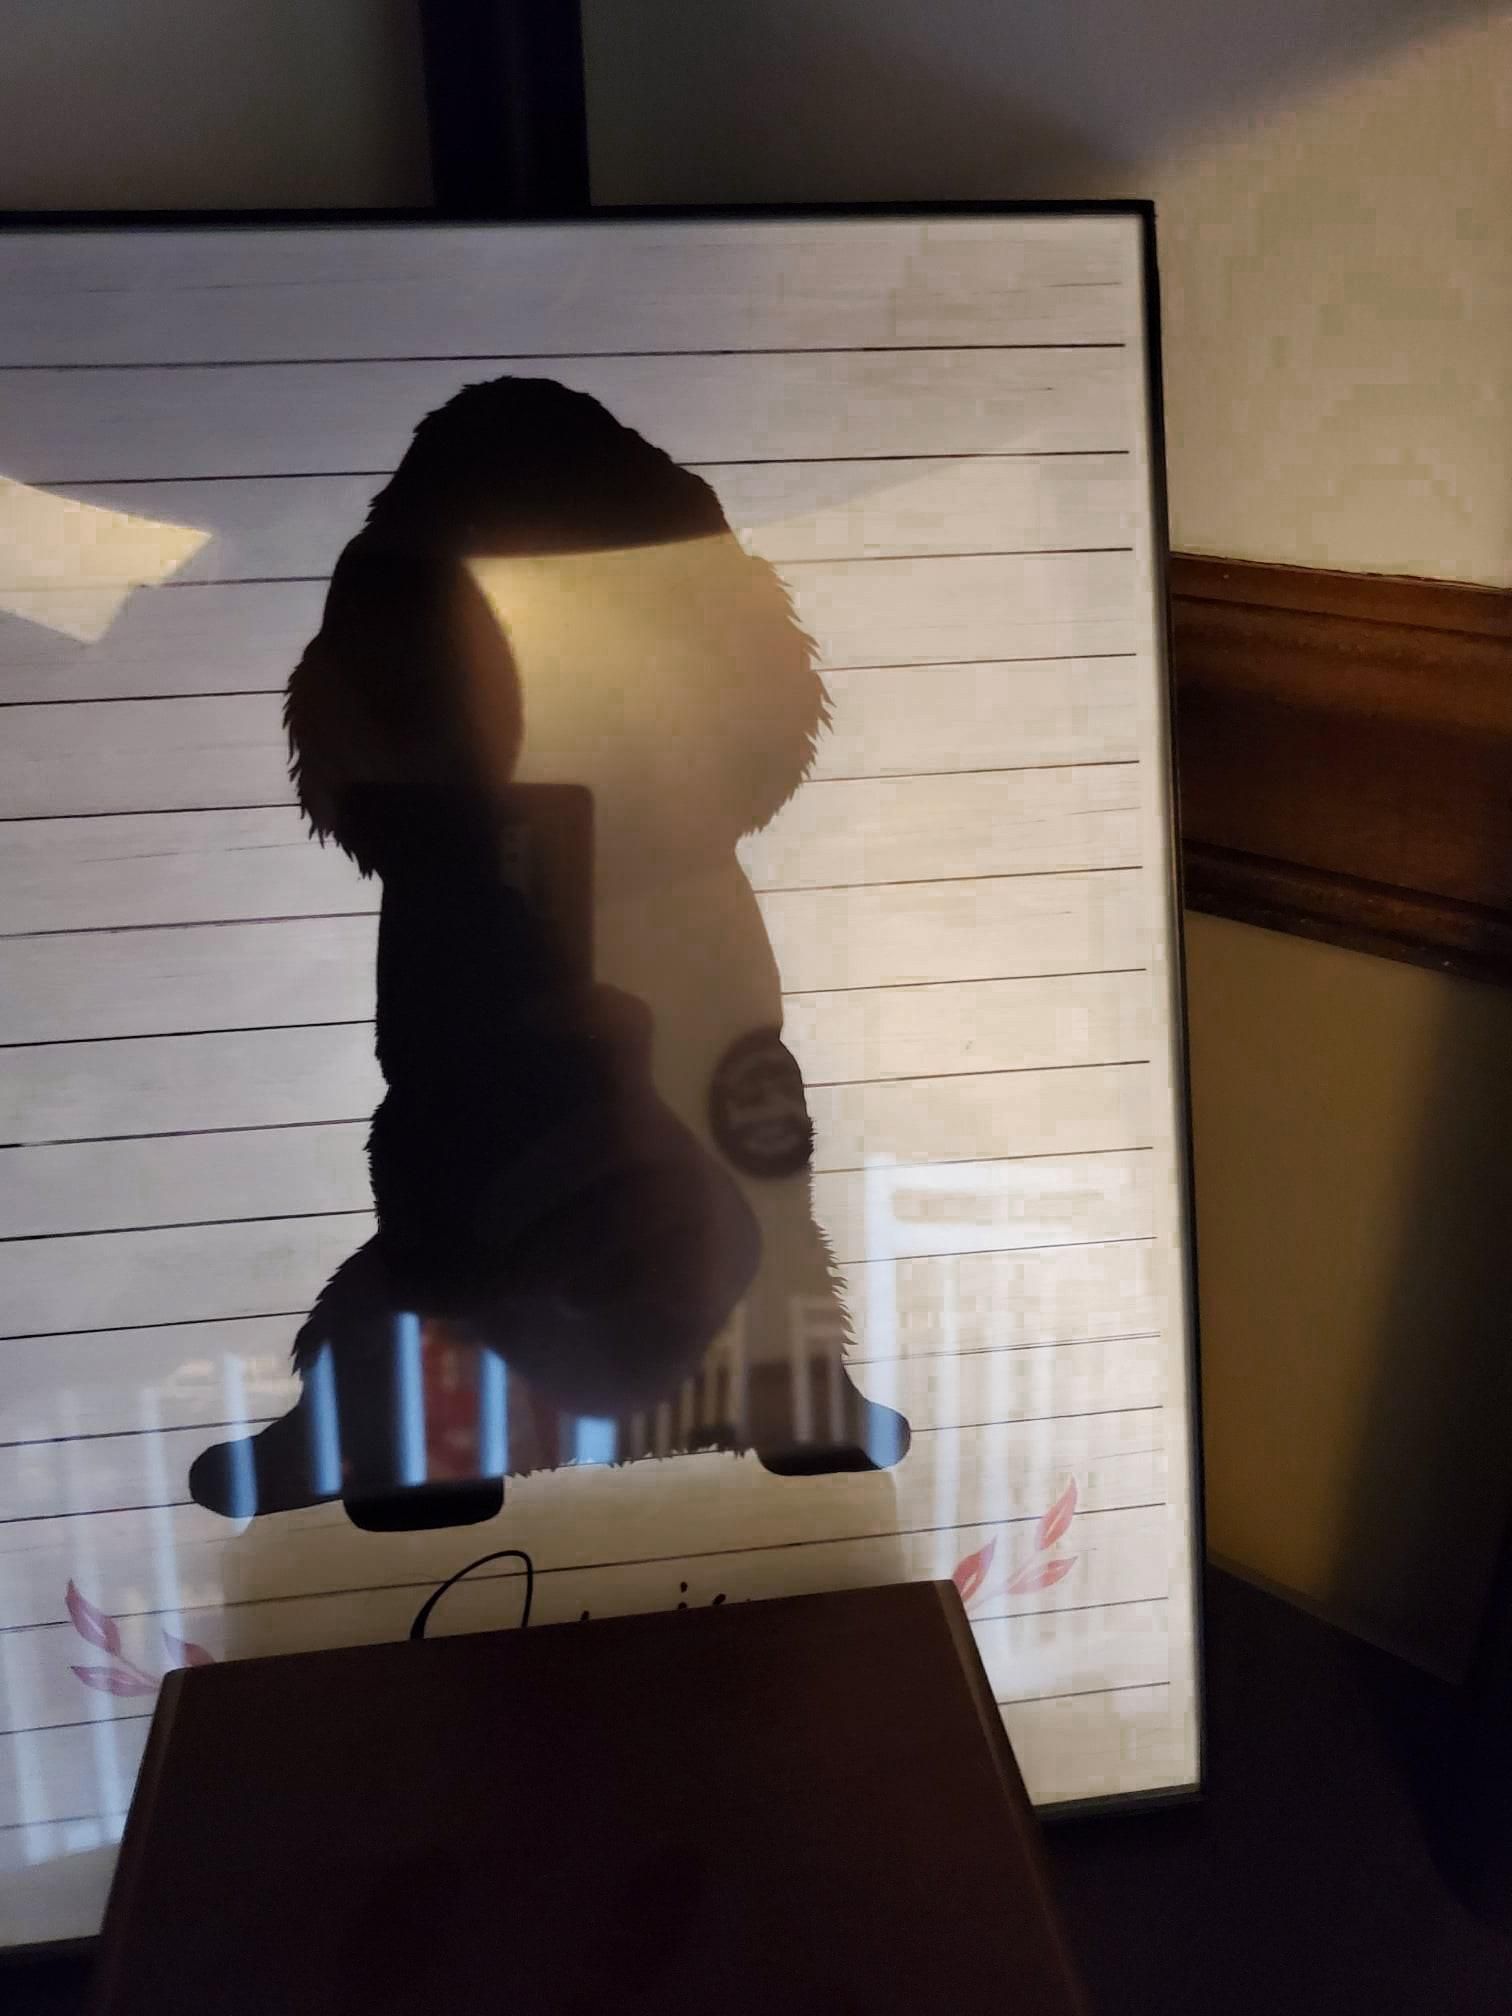 my friend got a silhouette of his deceased dog...